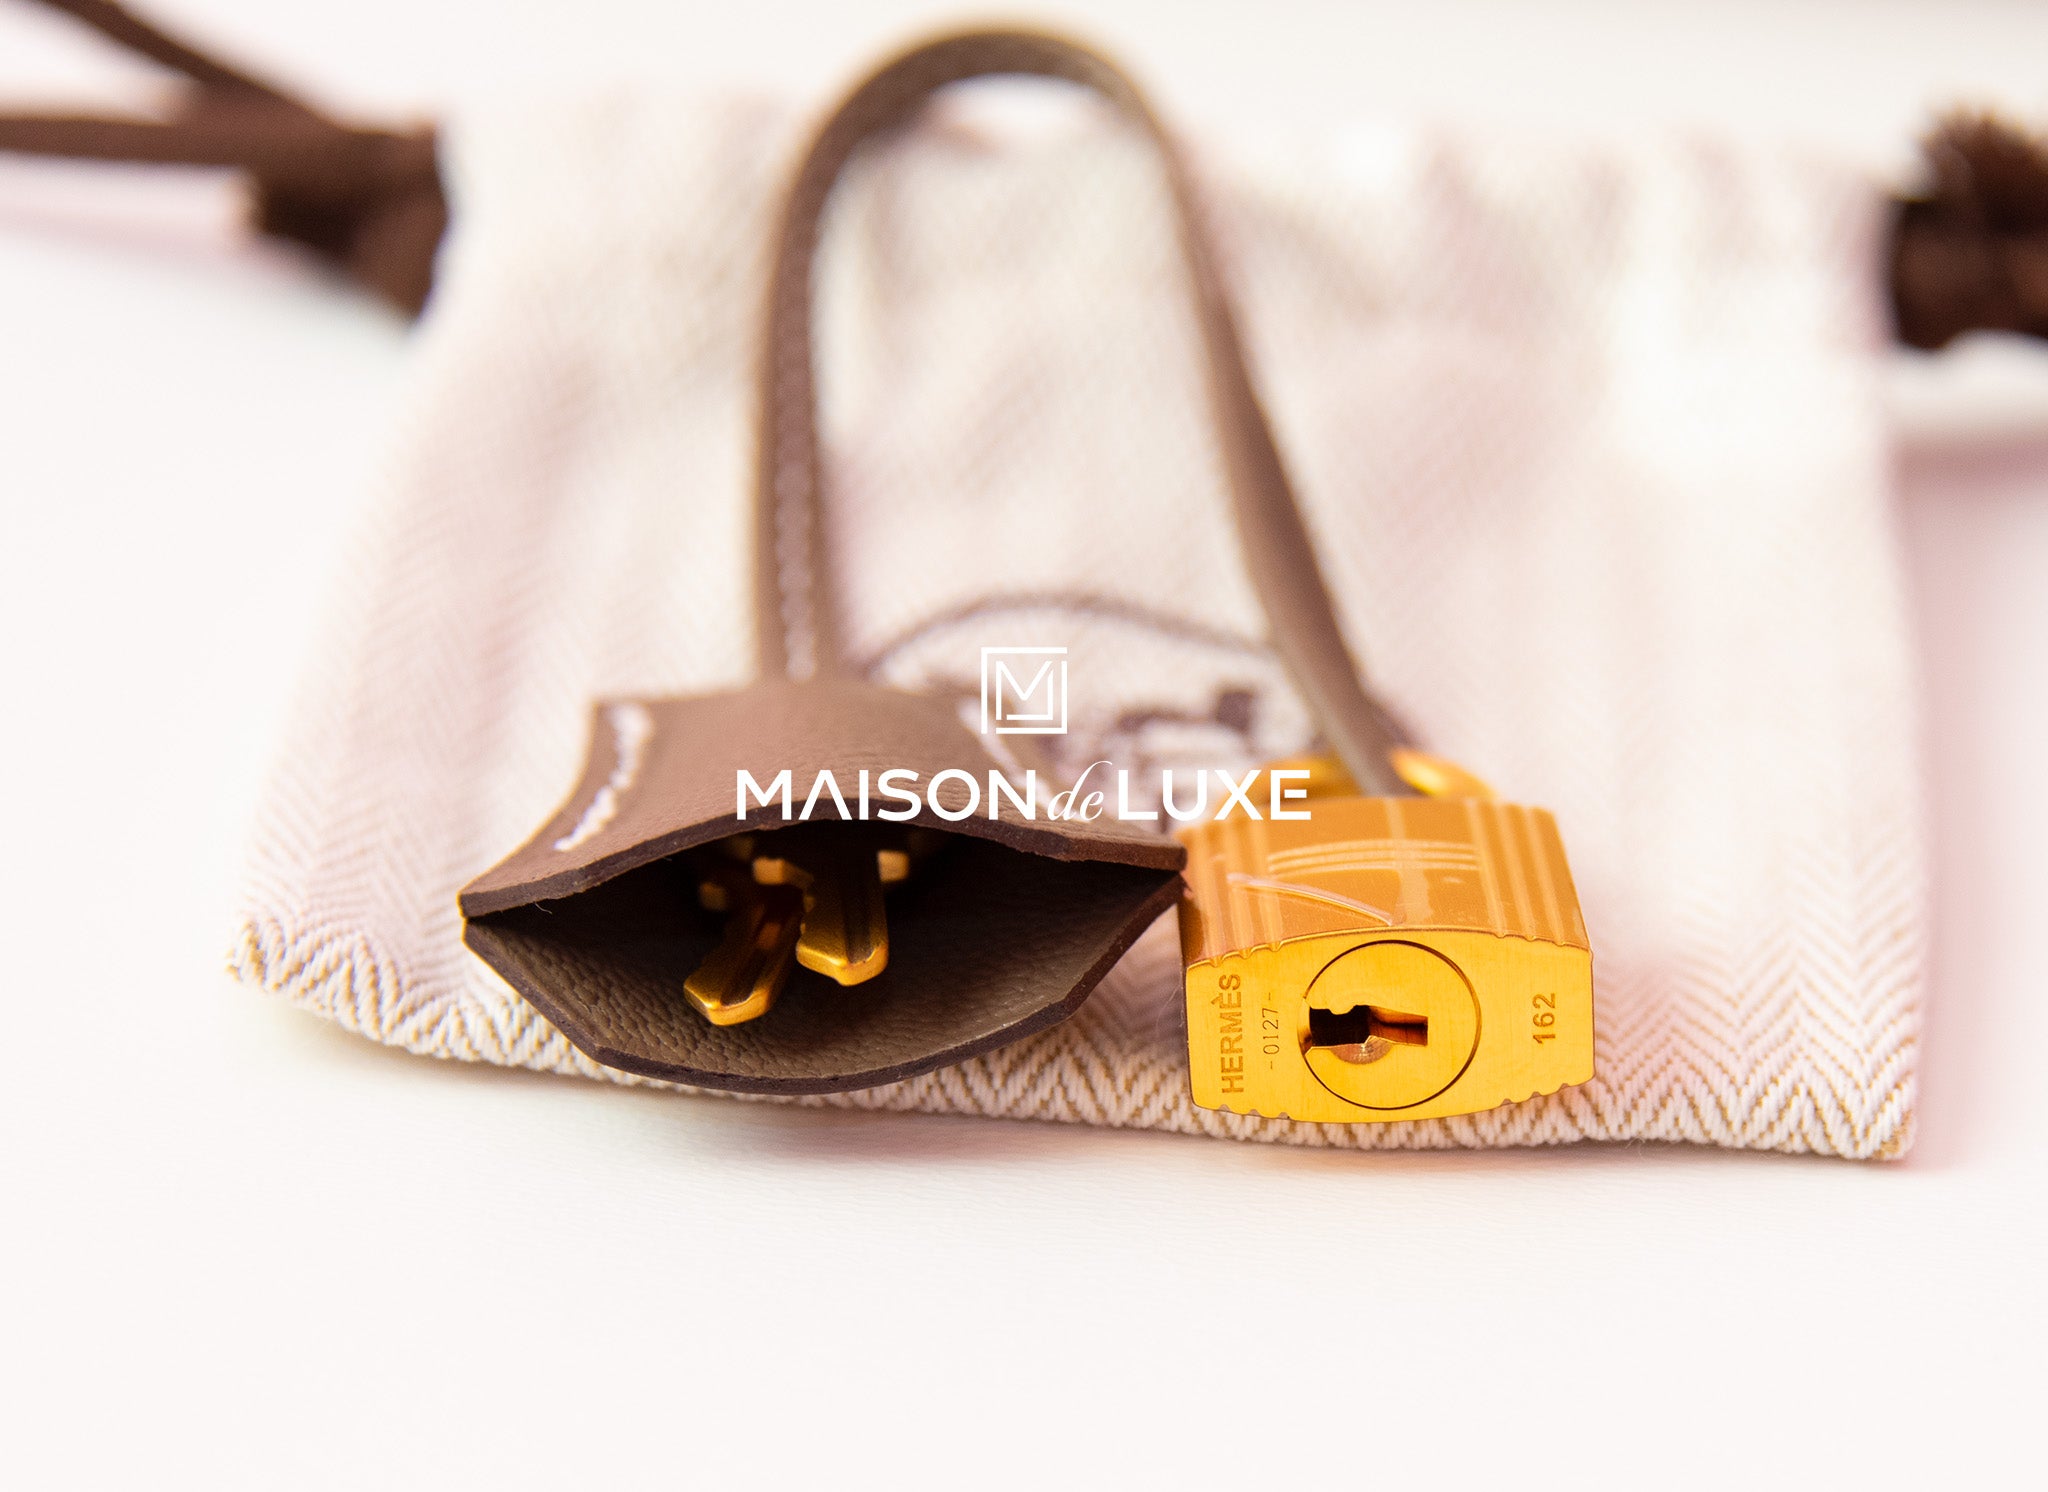 Hermes Special Order (HSS) Kelly Sellier 25 Etoupe and Craie Epsom bru –  Madison Avenue Couture